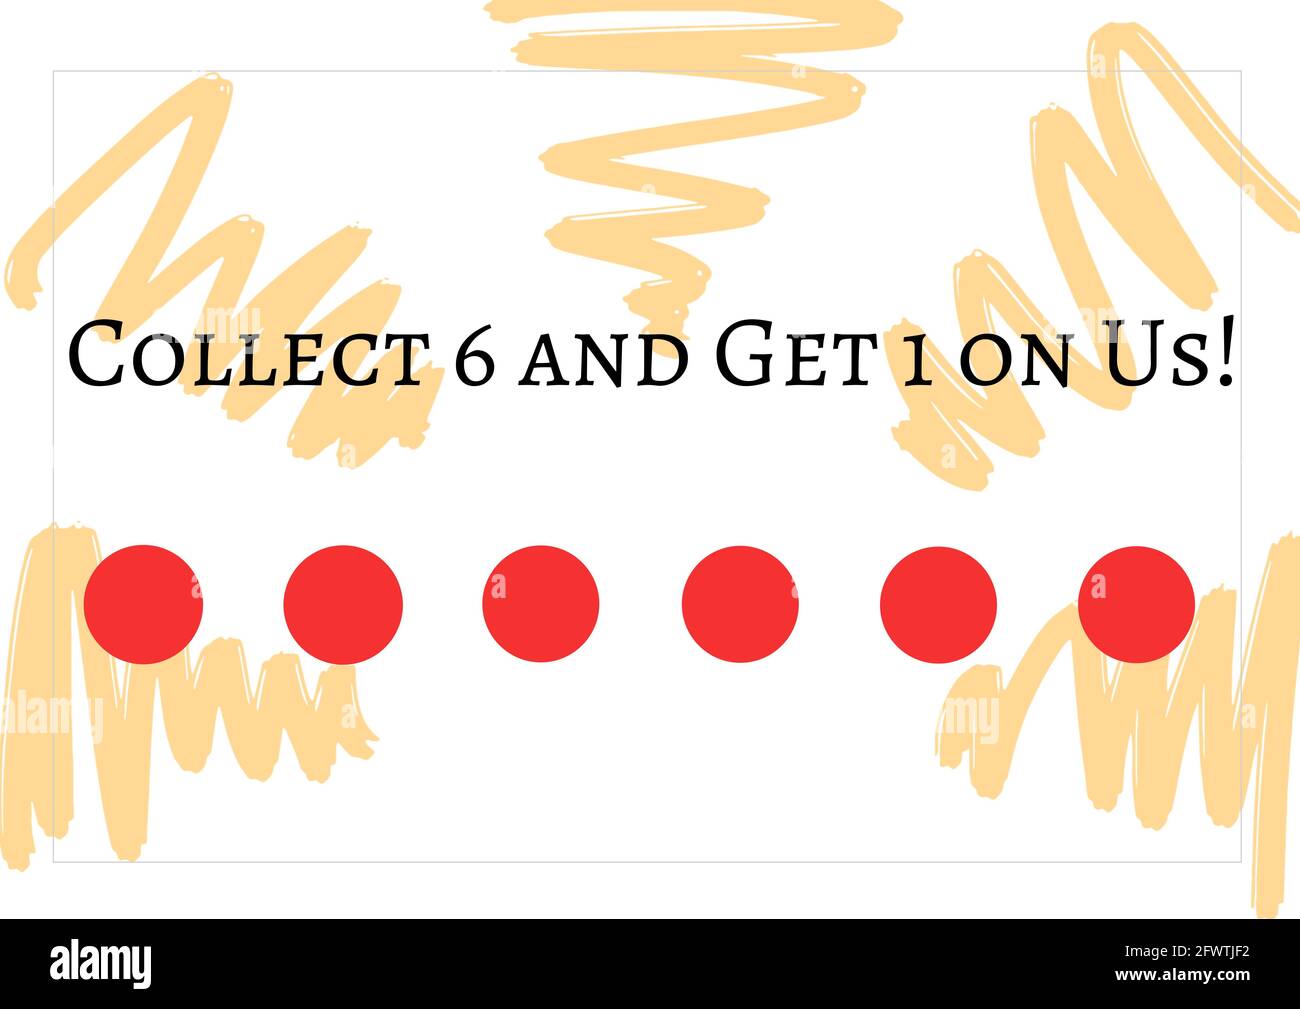 Composition of collect 6 get 1 on us text with six dots for loyalty stamps with squiggles Stock Photo